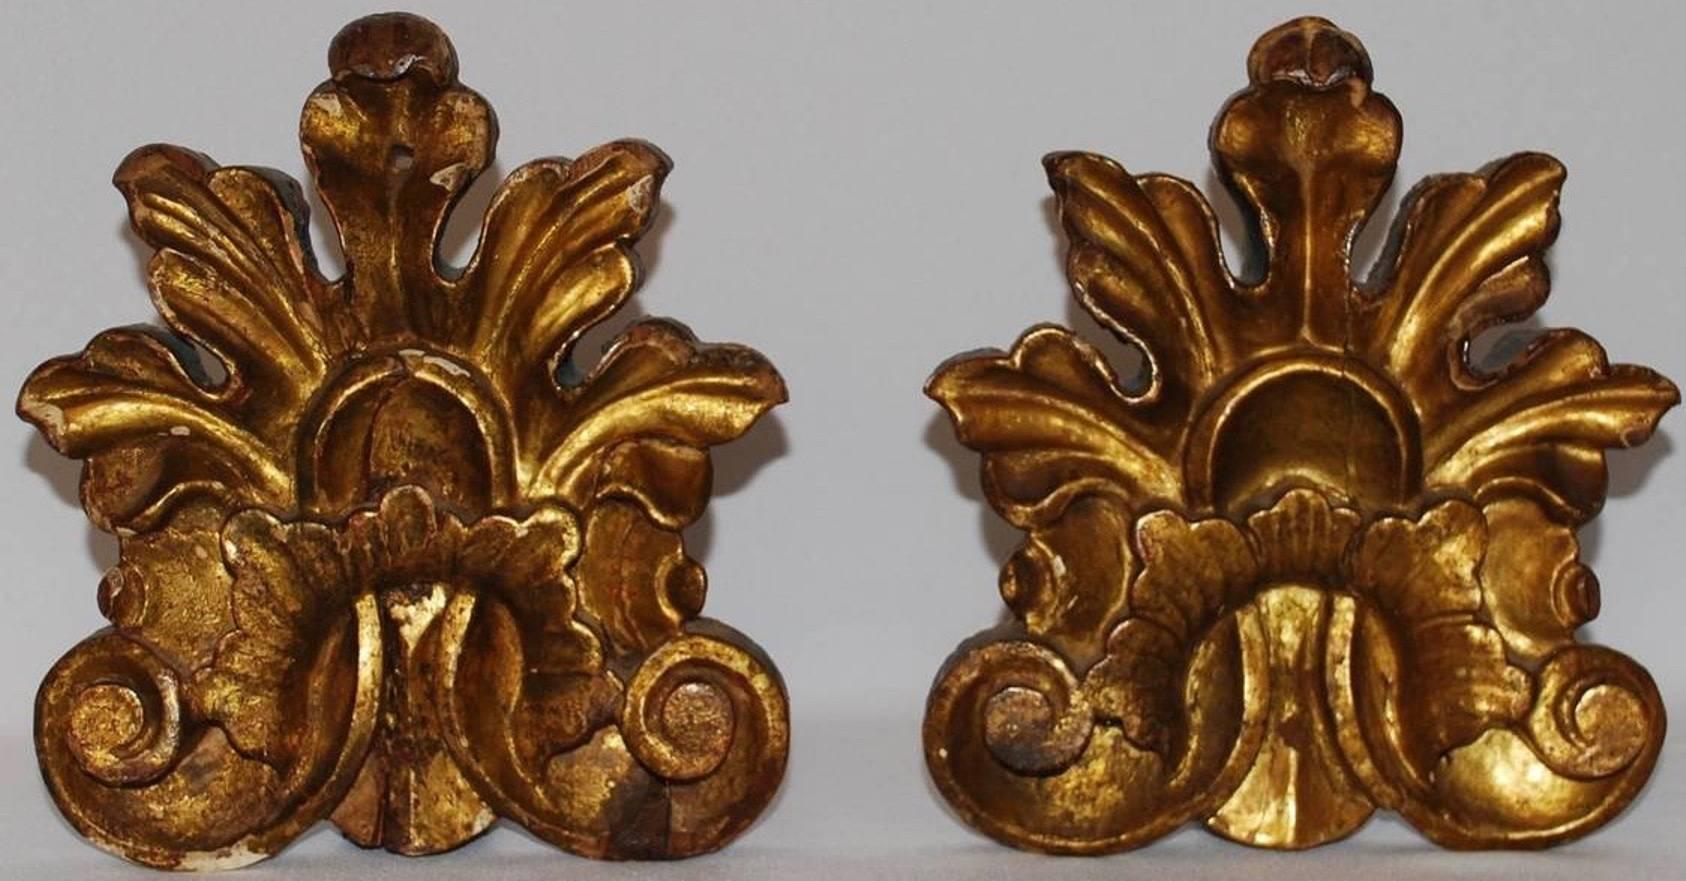 Pair 18th century Italian giltwood neoclassical ornaments.  Gilt carved anthemion architectural elements for display or as bookends.  Italy, late 18th century.
Dimensions: 9" H x 7.75" W
